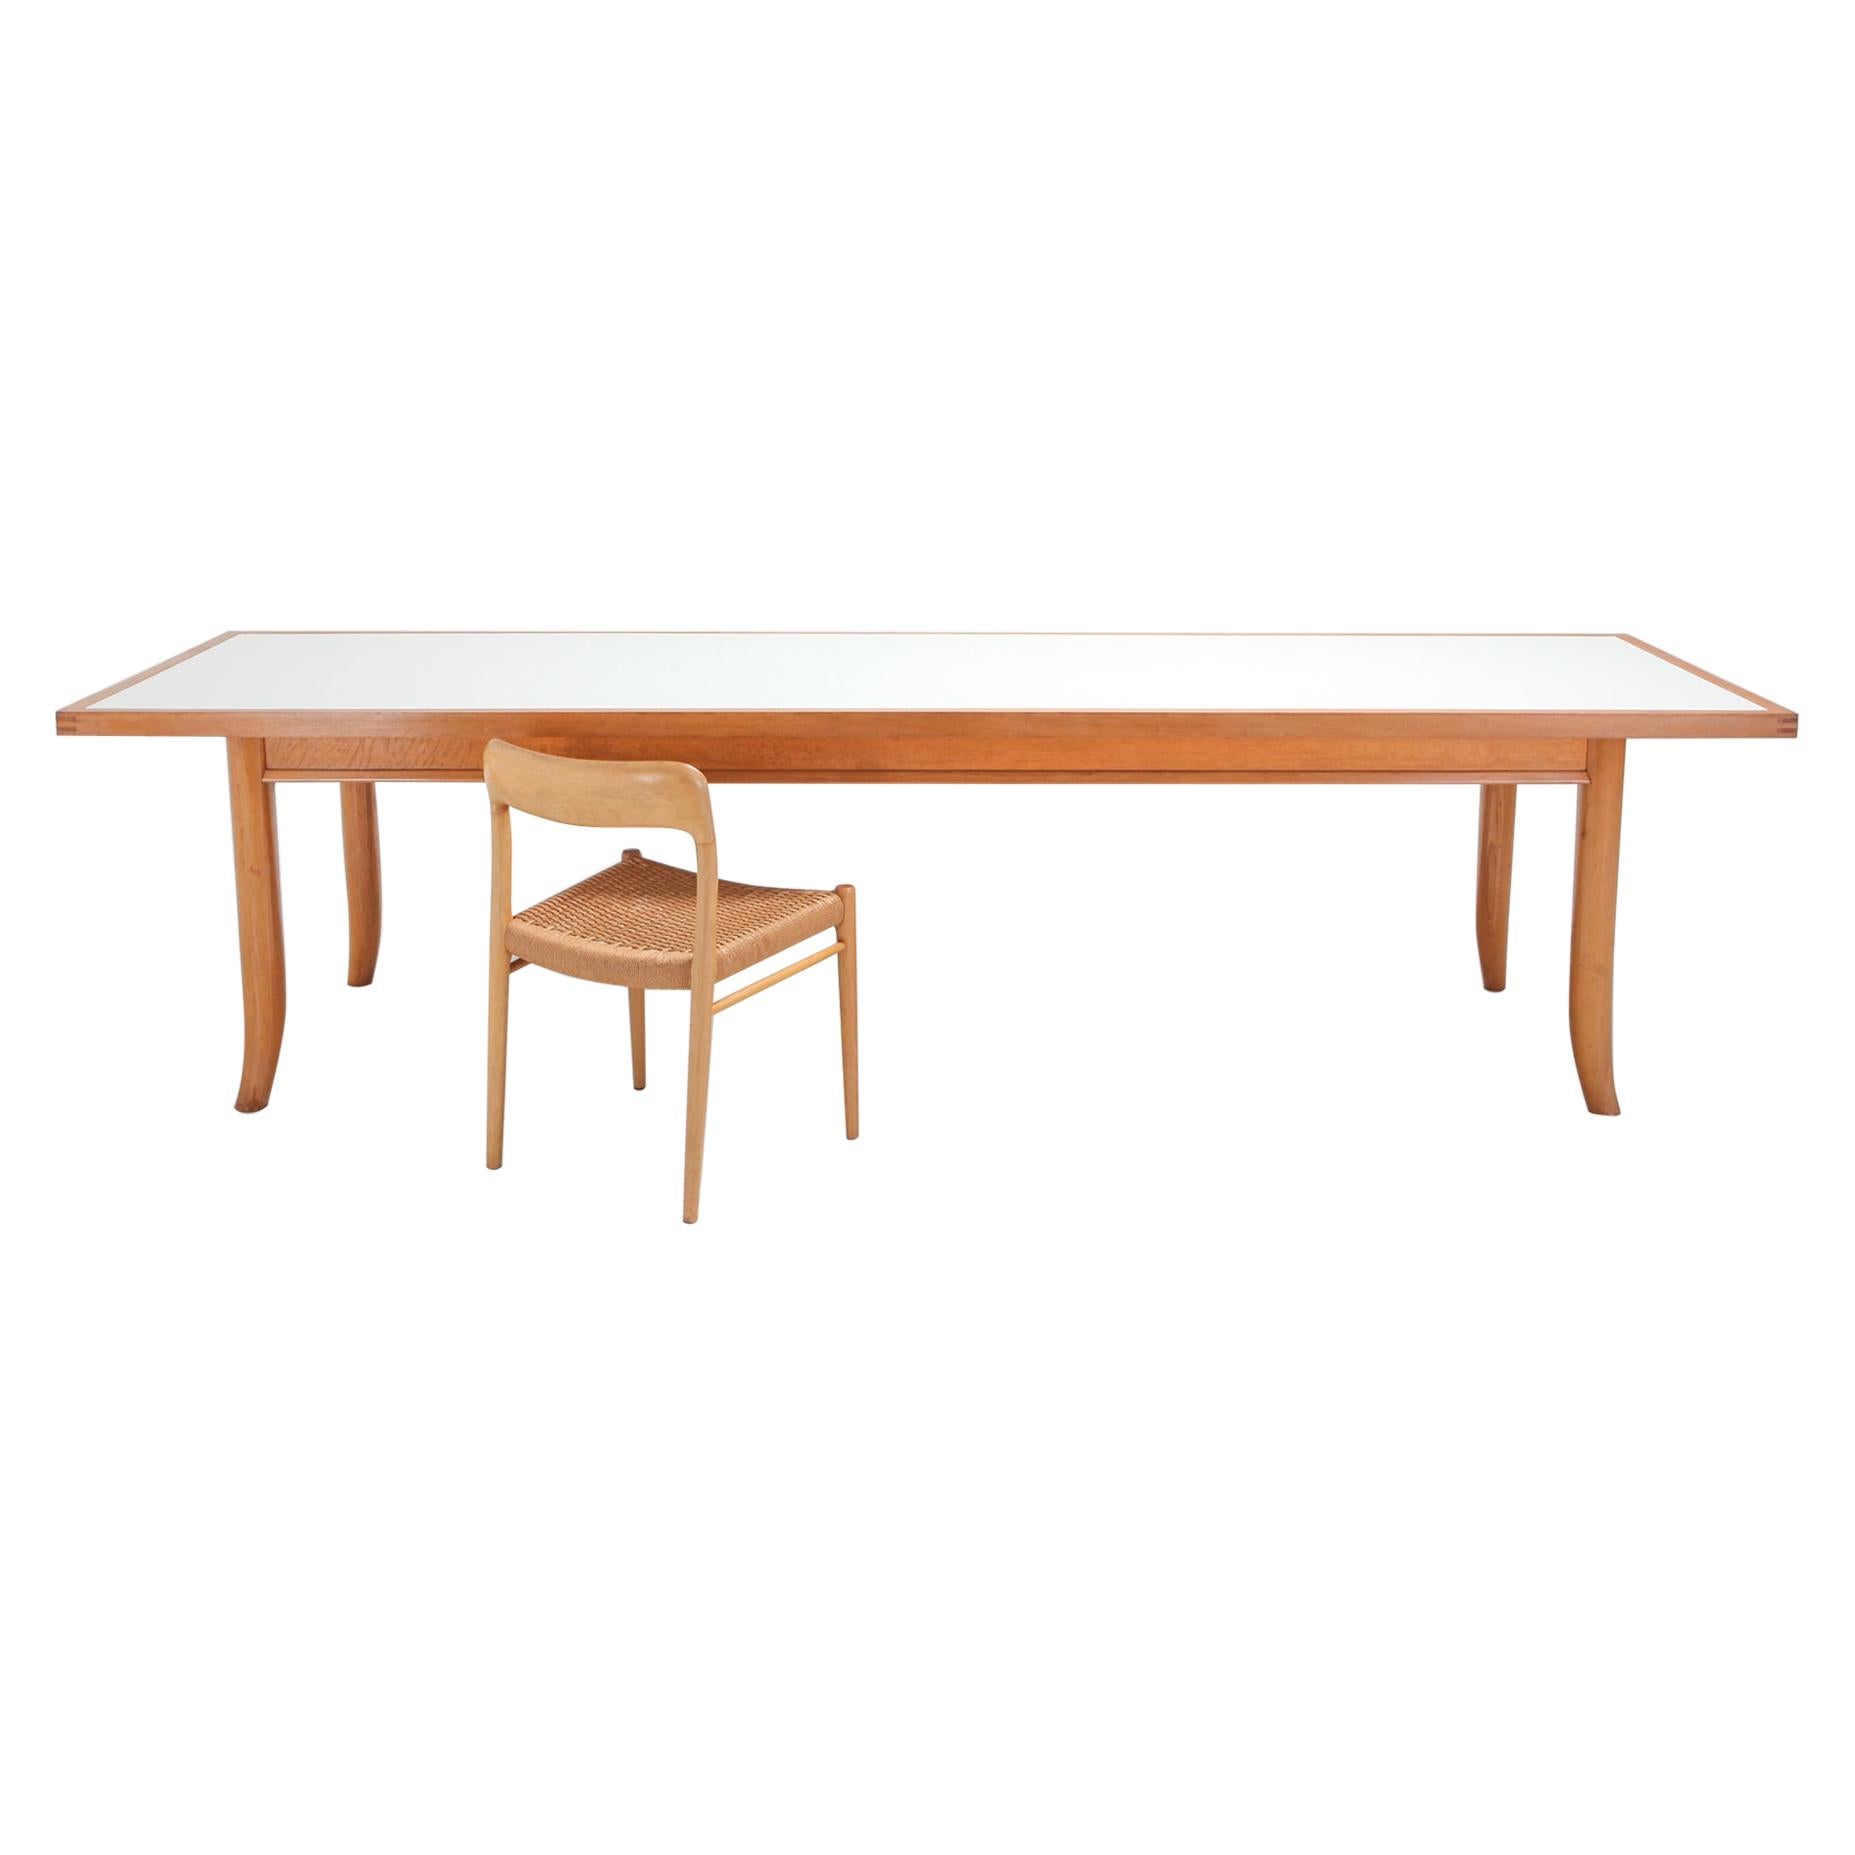 George Nakashima style over size oak dining table, designed by Robsjohn-Gibbings.

Robsjohn-Gibbings worked for the same company as Nakashima called Widdicomb. 
This particular piece is more high-end than the Widdicomb furniture pieces so it was